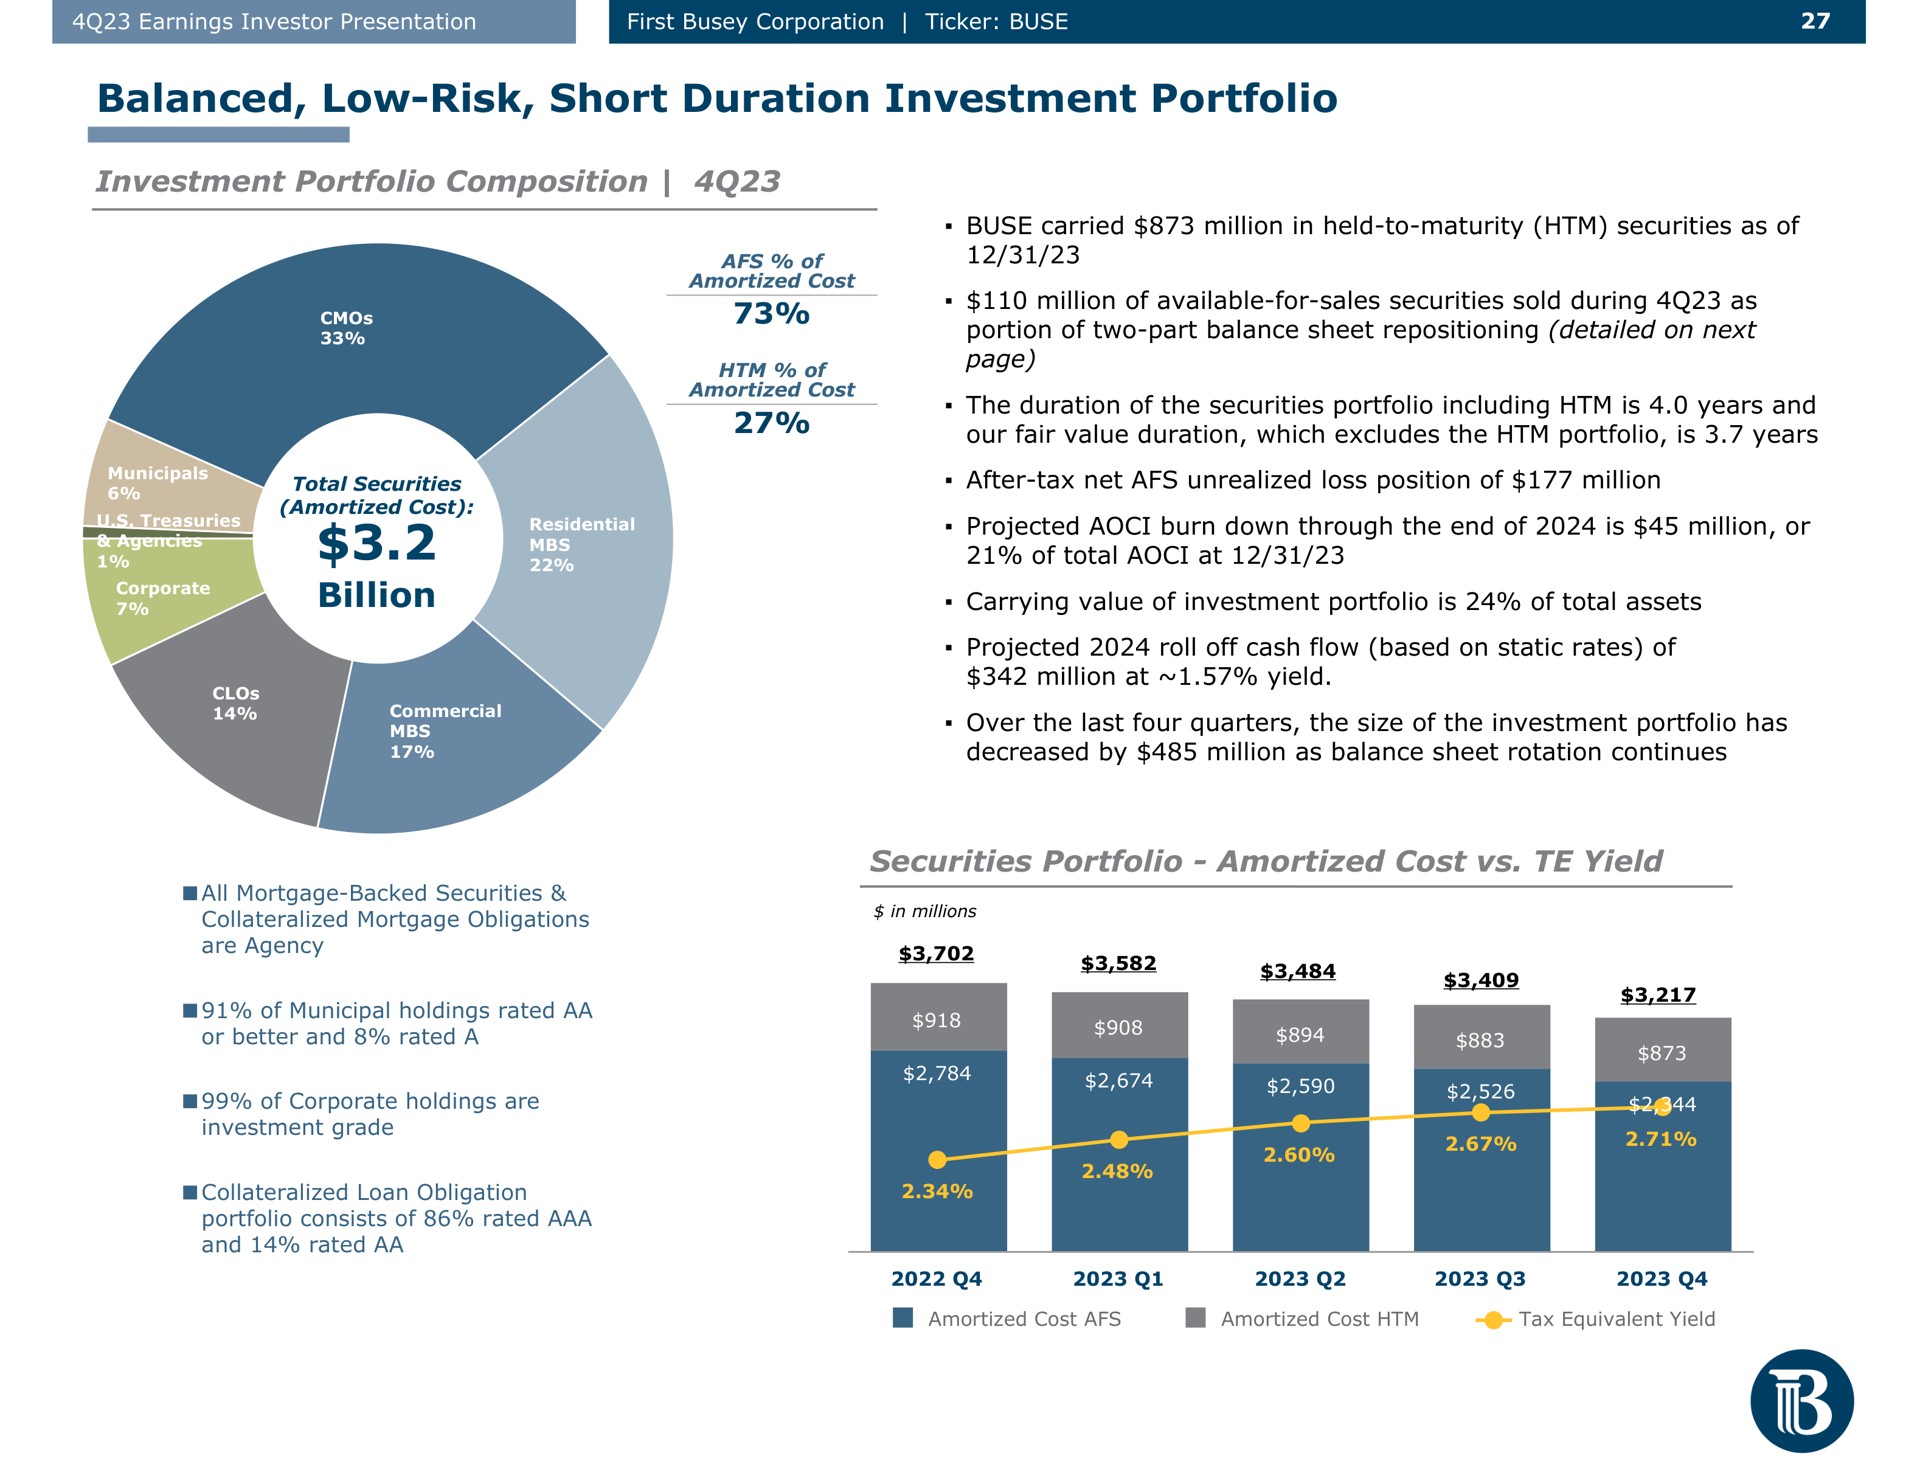 balanced low risk short duration investment portfolio investment portfolio composition securities portfolio amortized cost yield billion of of page | First Busey